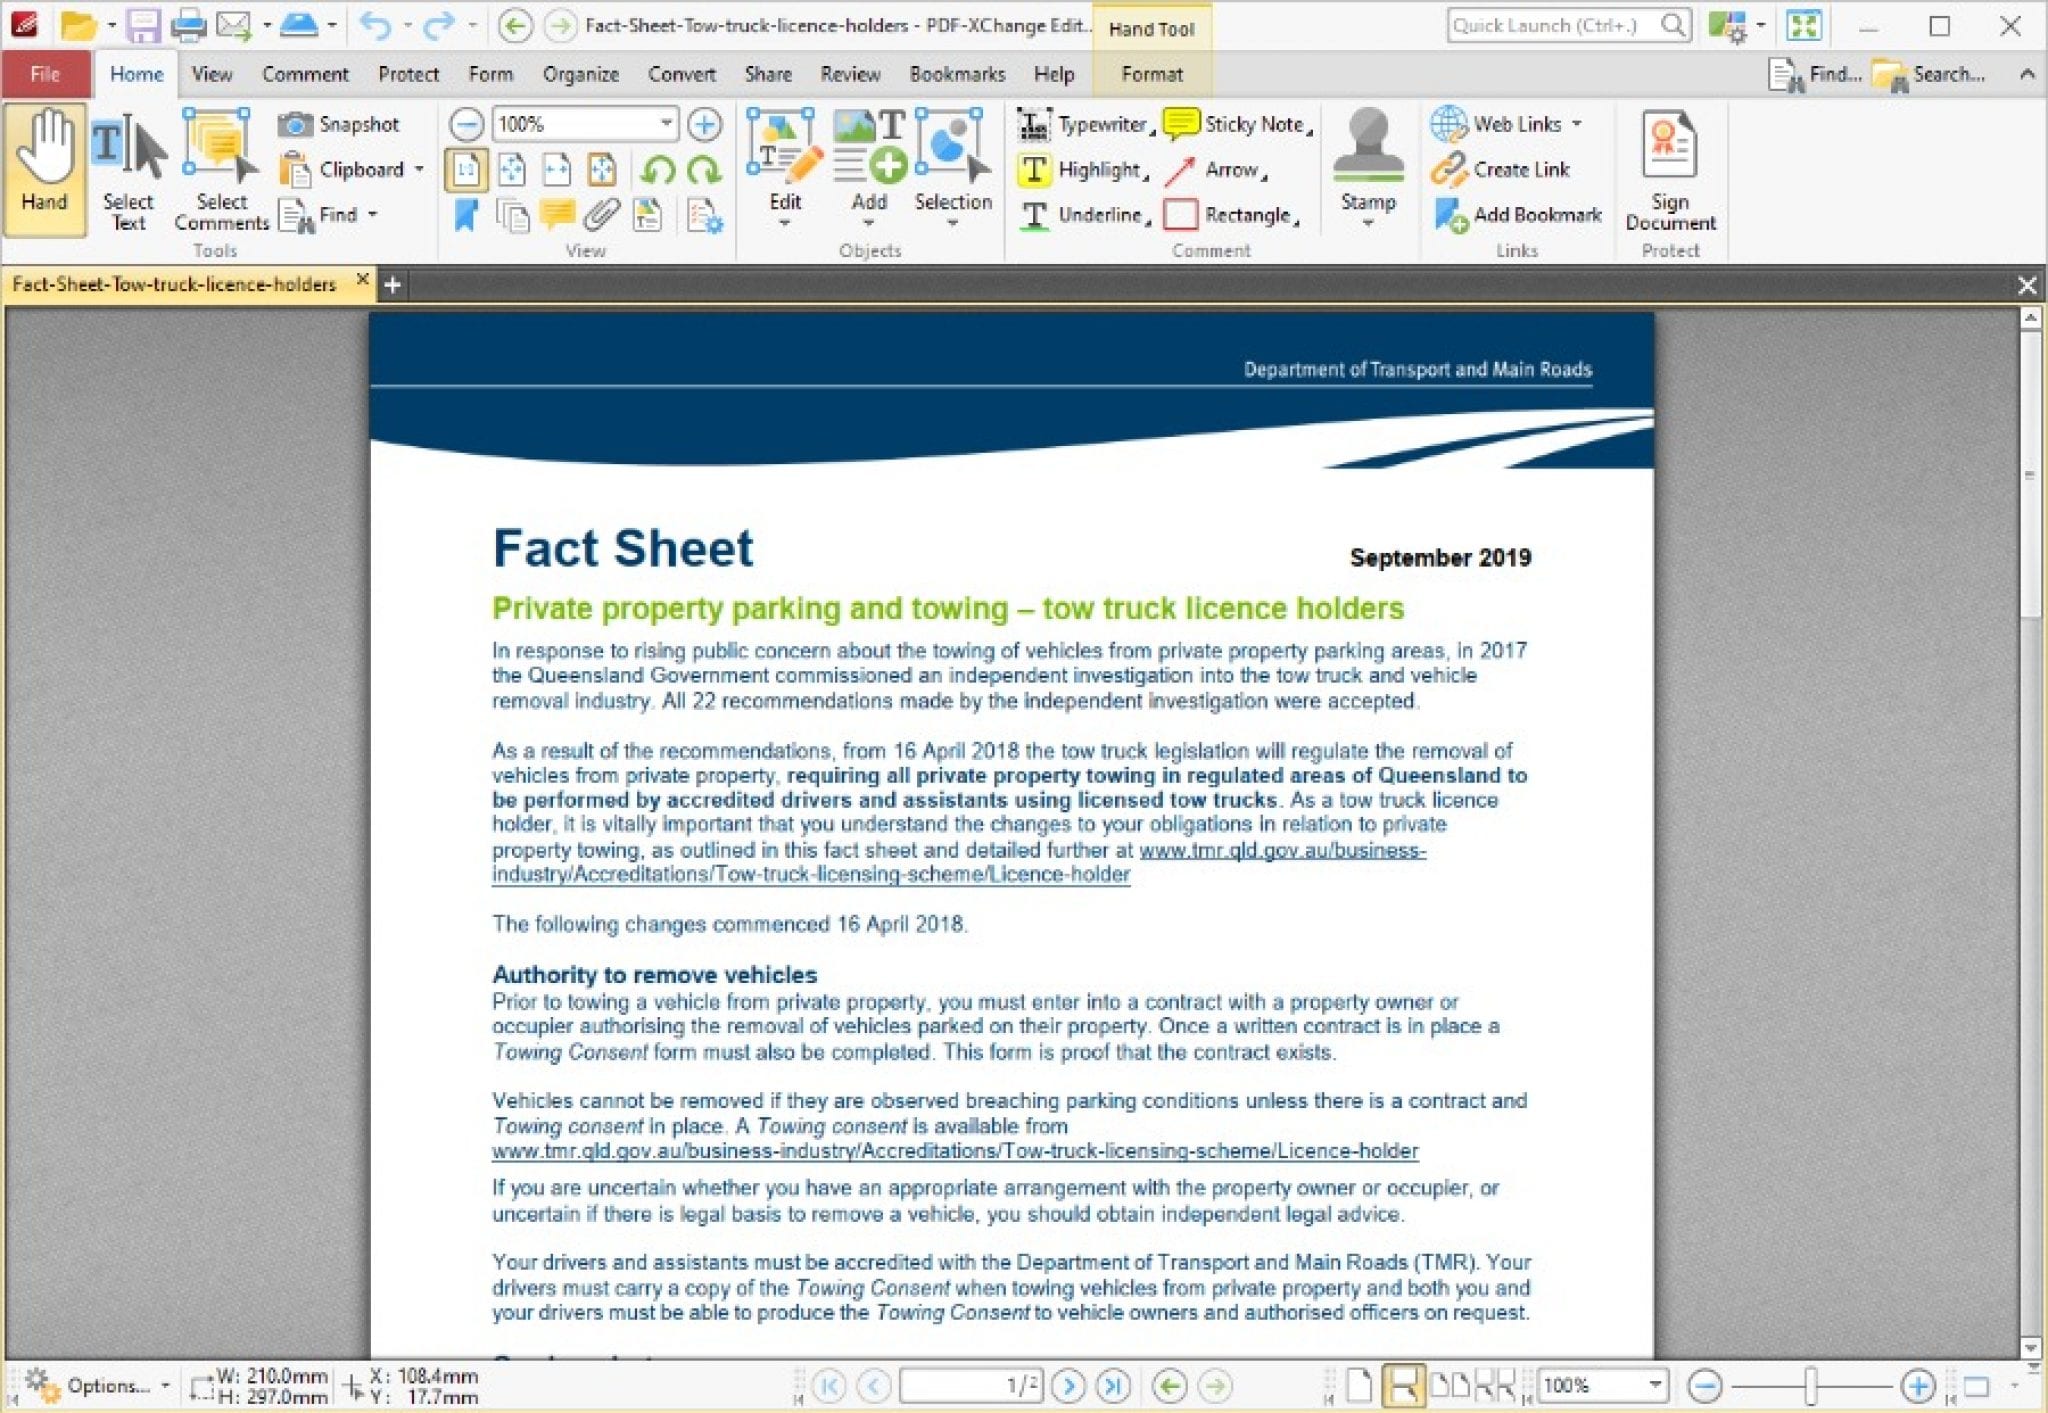 pdf reader and editor for windows